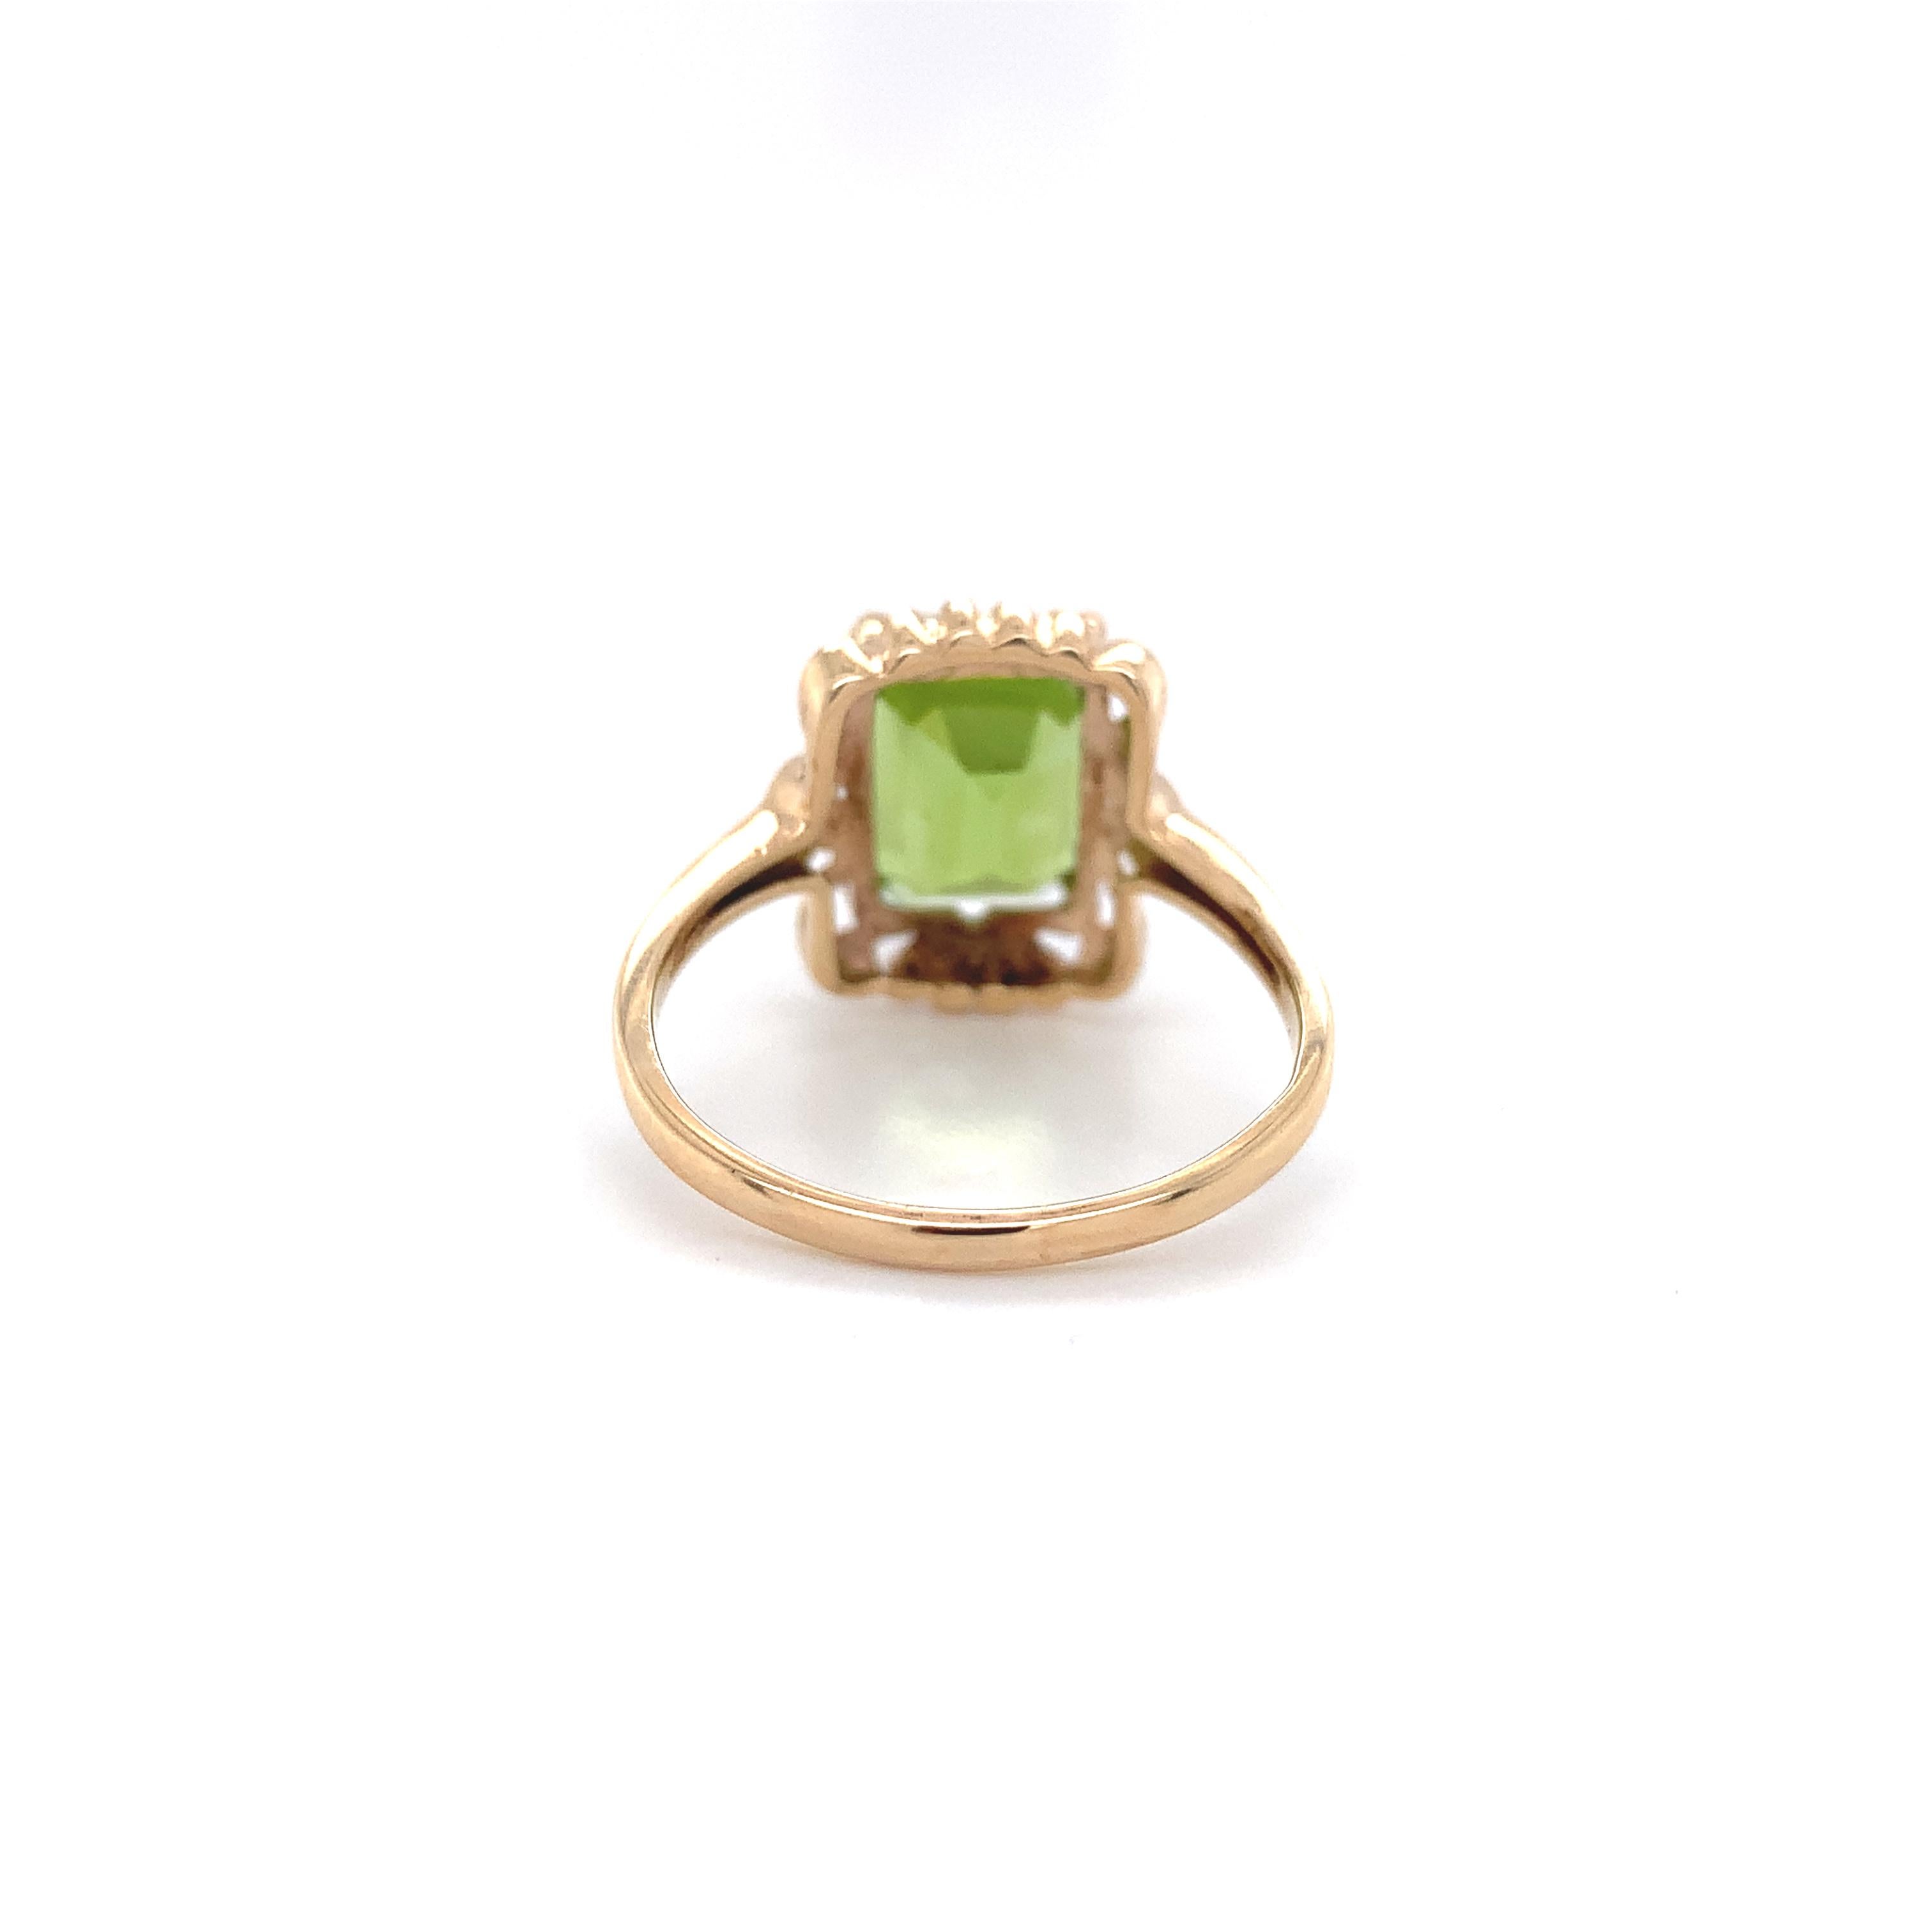 10K Yellow Gold 3.73 carat Peridot Ring In Good Condition For Sale In Big Bend, WI